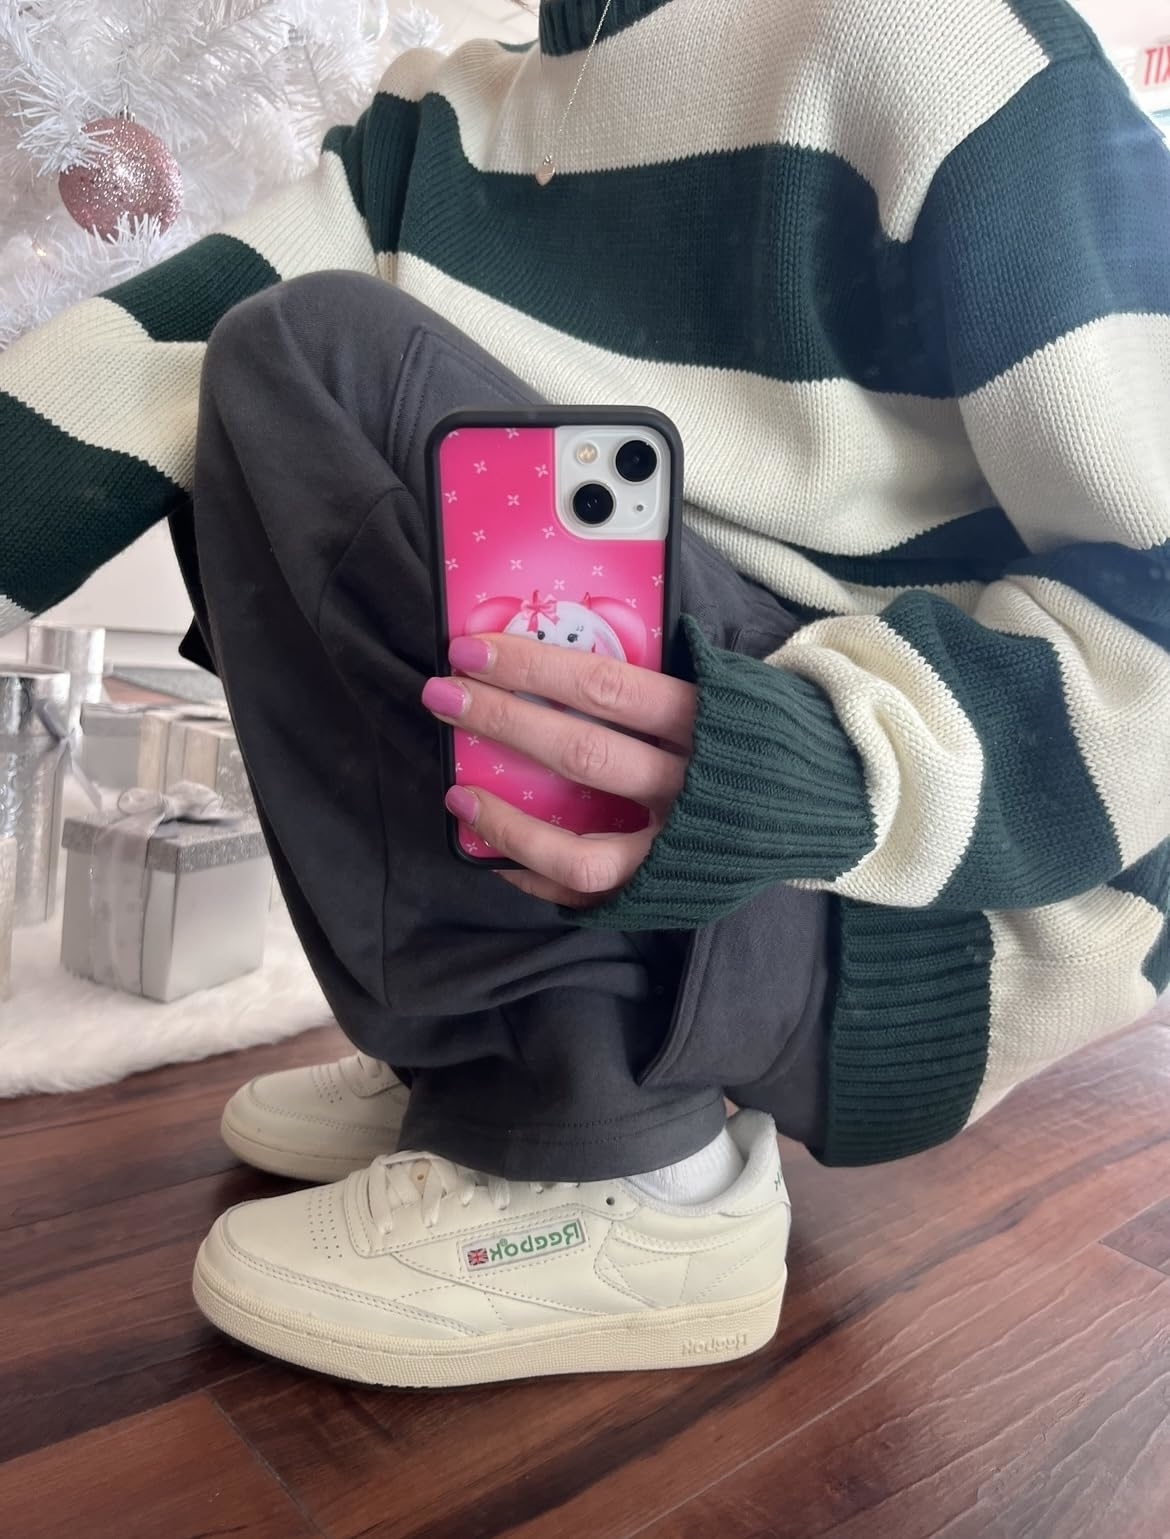 Person sitting with crossed legs, holding phone with a pink case, wearing green and white striped sweater and beige sneakers